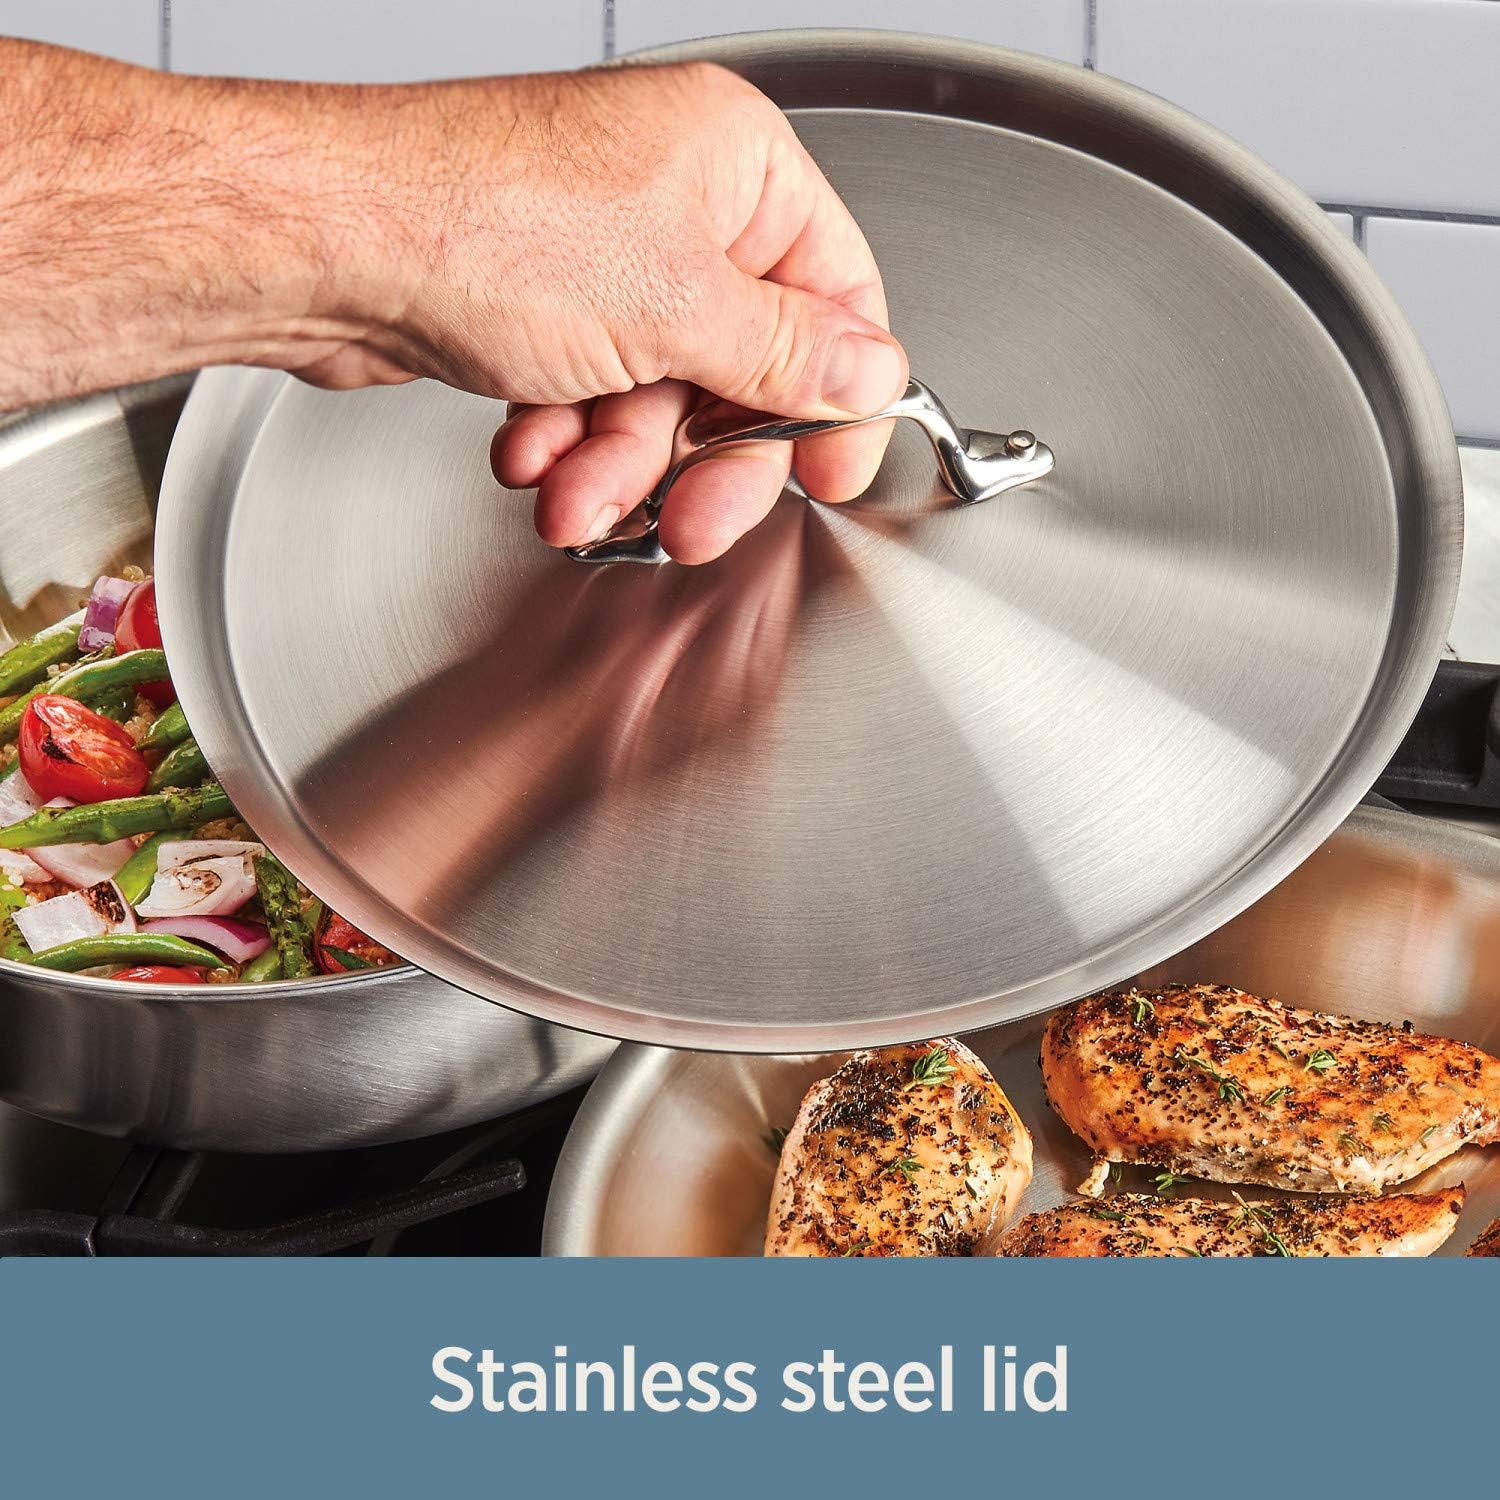 ALL-CLAD Stainless 1-Qt Sauce Pan